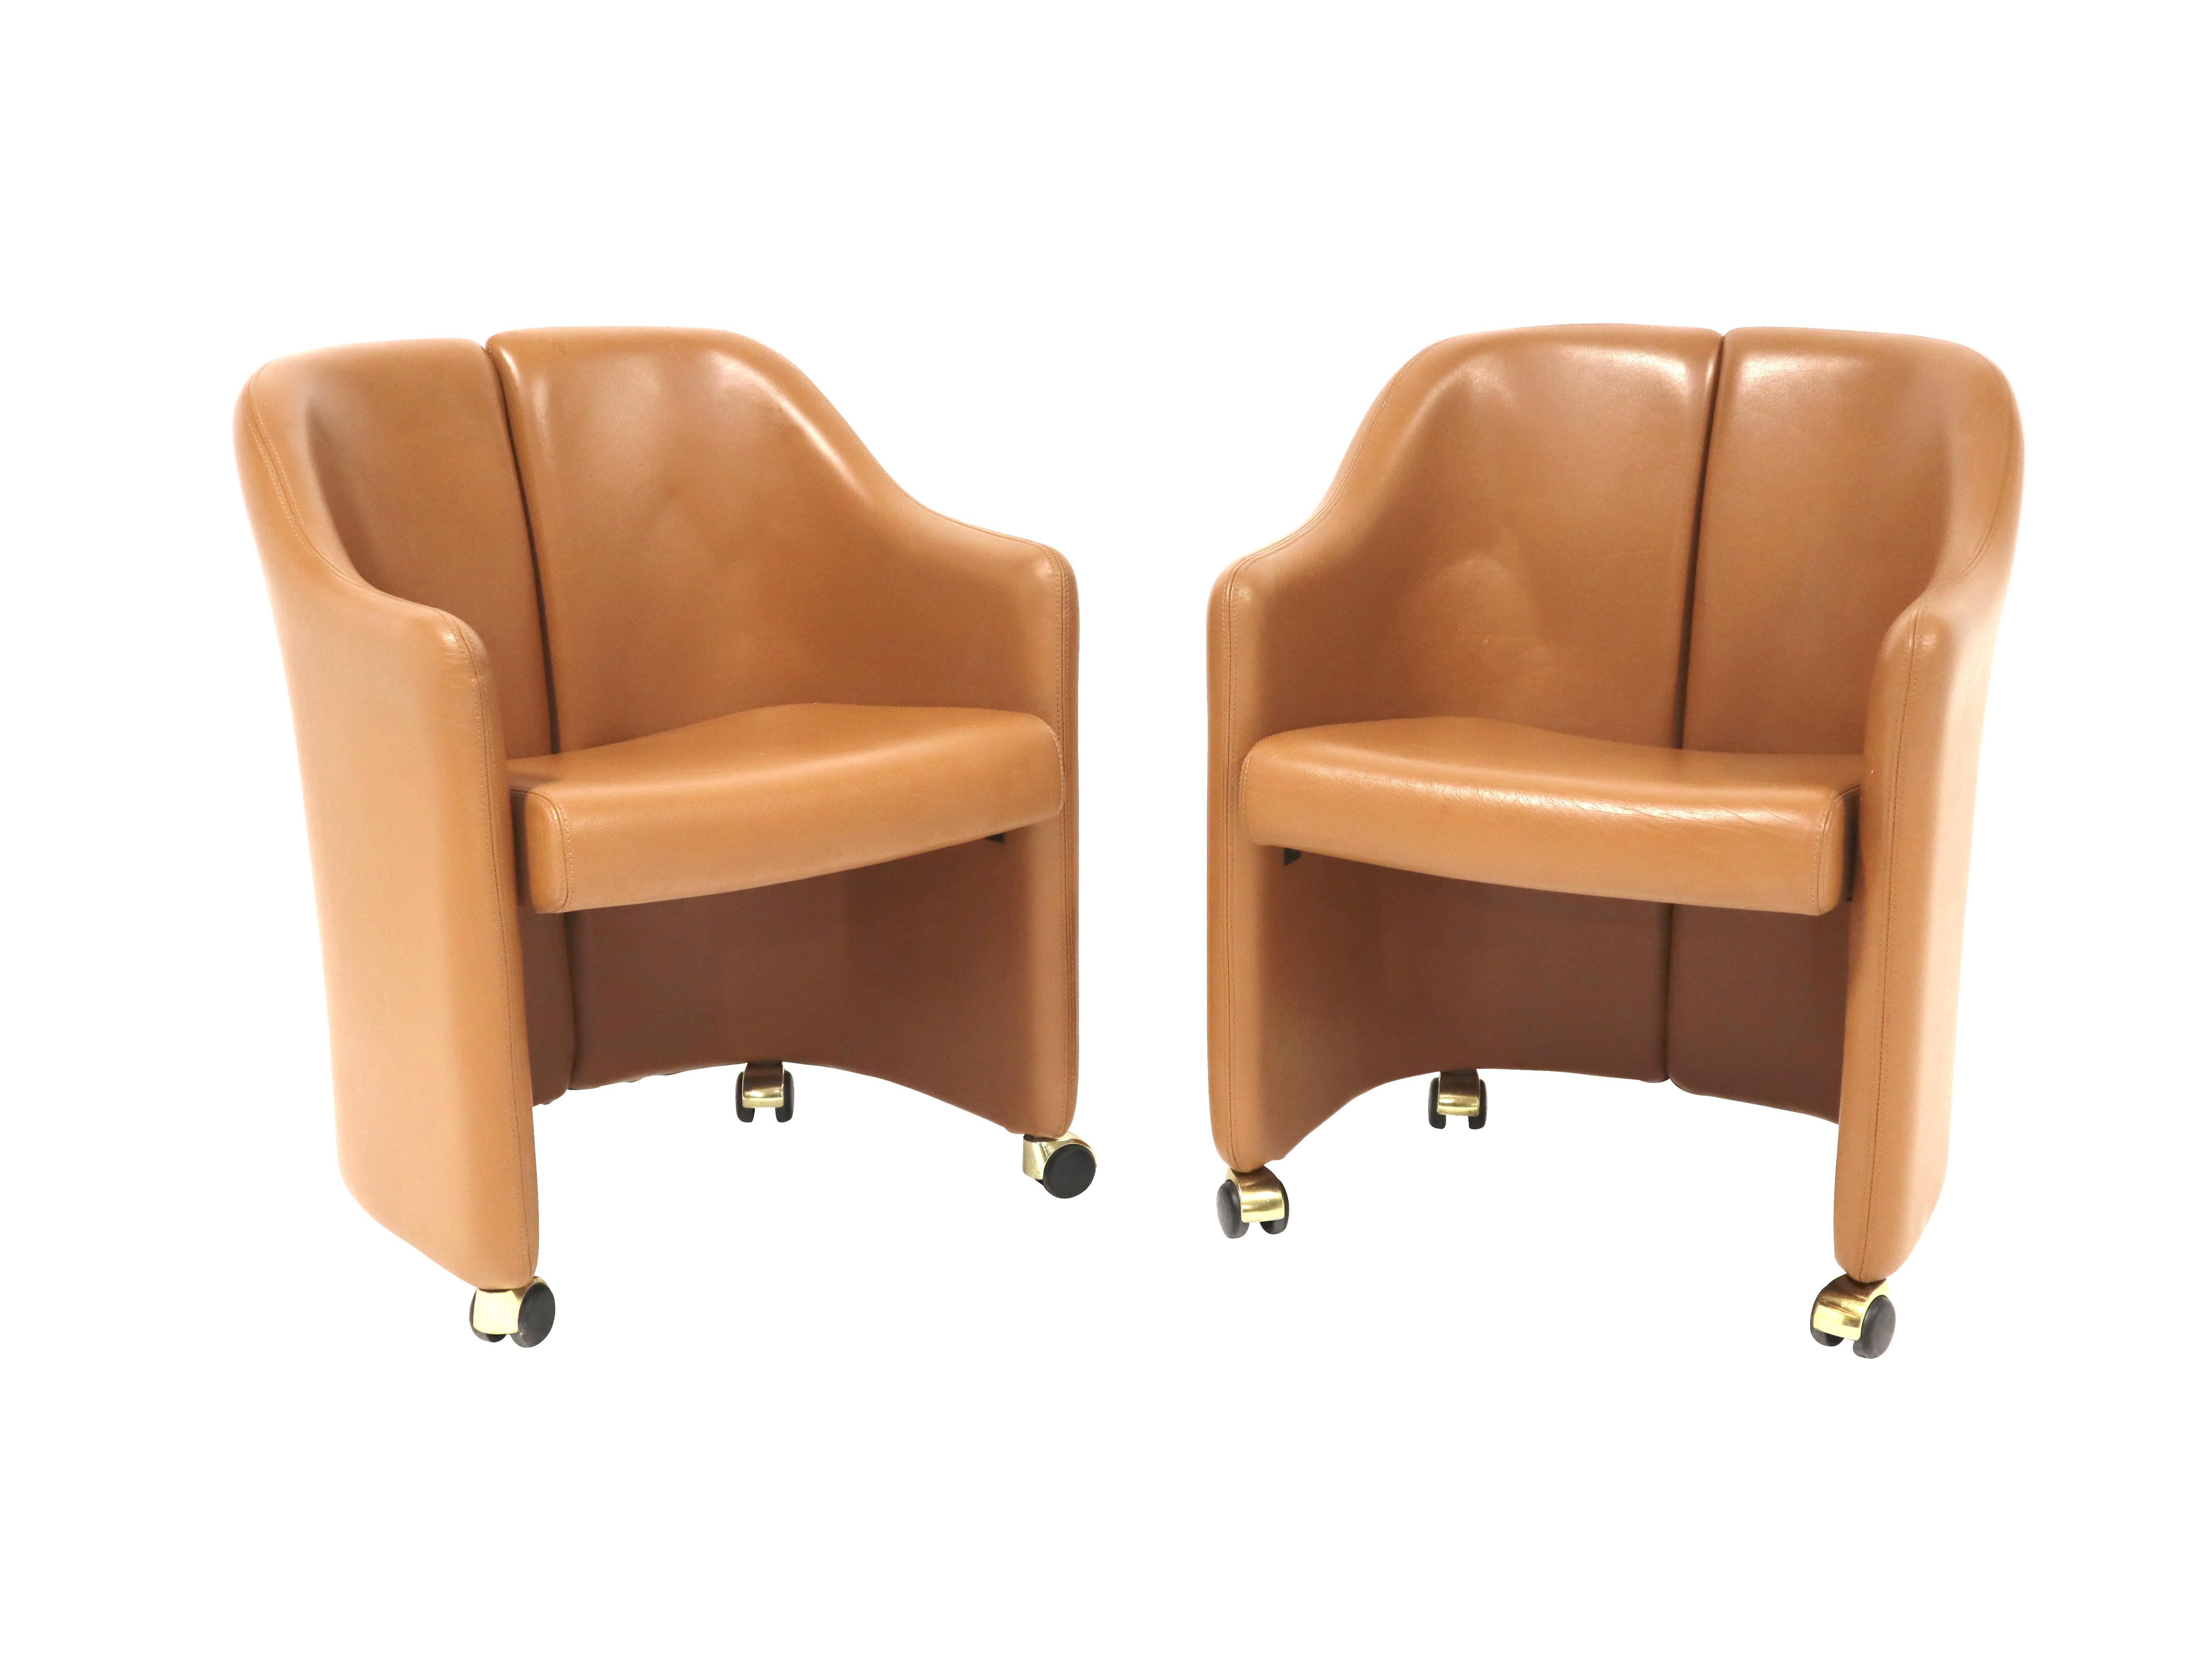 Late 20th Century Set of 10 Eugenio Gerli for Tecno, “Series 142” Executive Leather Dining Chairs